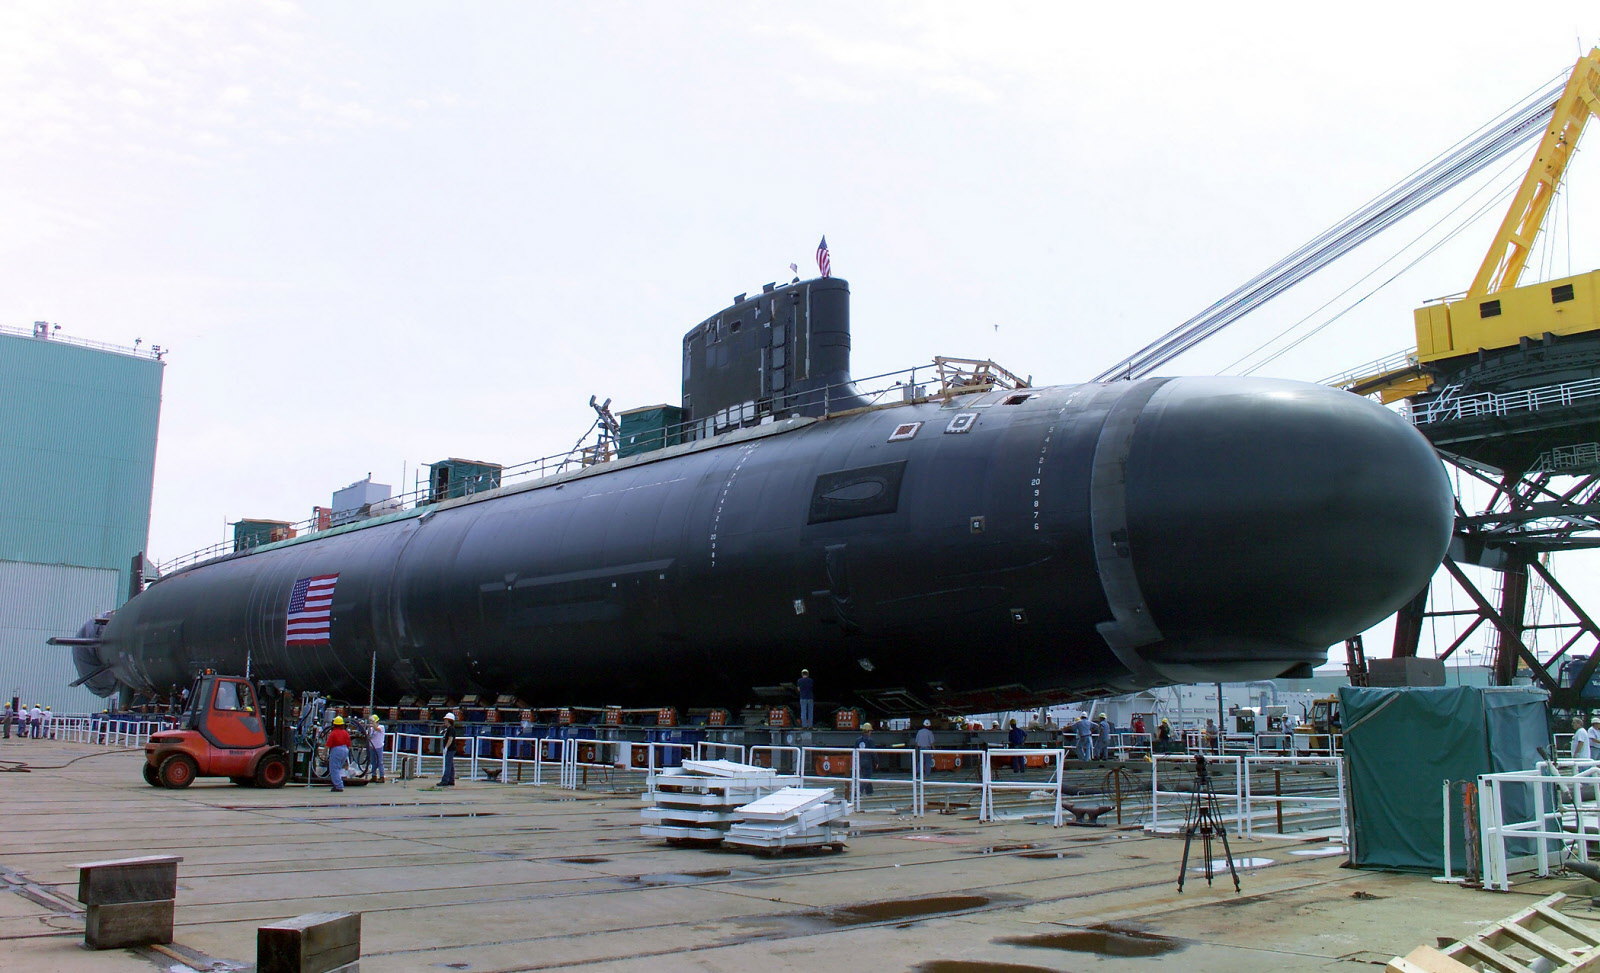 AUKUS Nuclear-Powered Submarine Deal – Non-proliferation Aspects